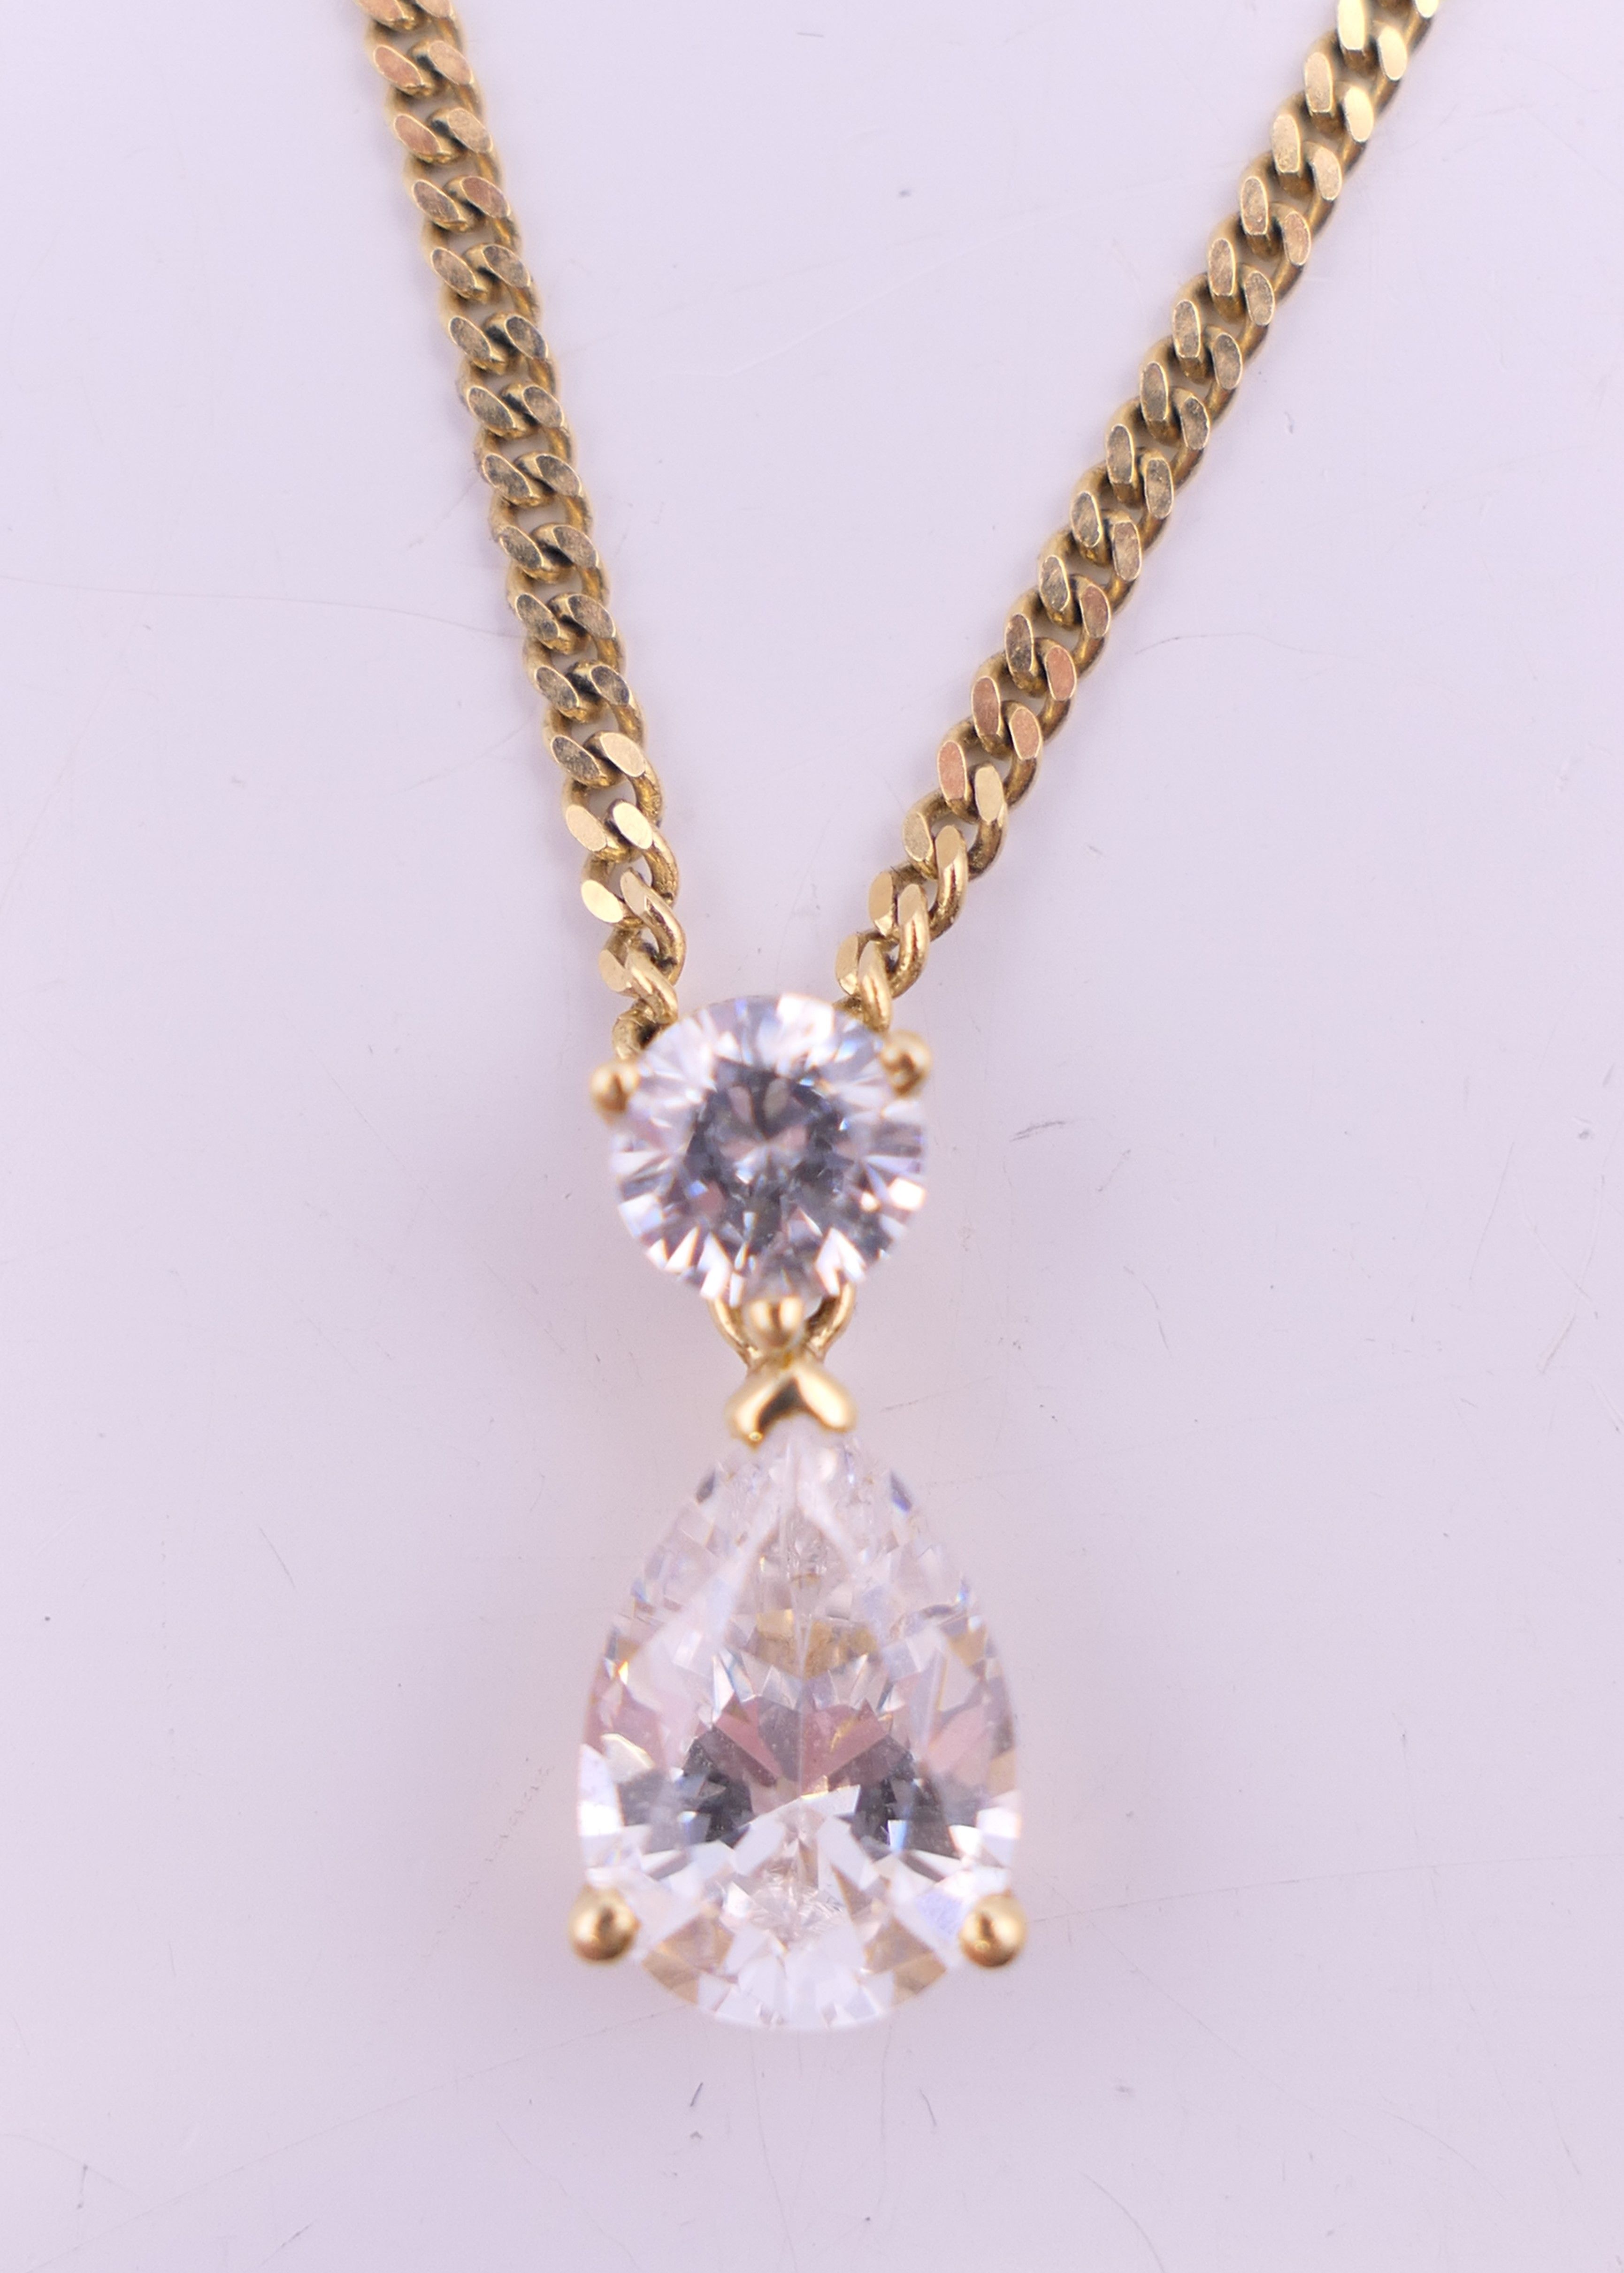 A 14 K gold two stone pendant necklace. Chain 44 cm long, pendant 1.5 cm high. 5. - Image 2 of 5